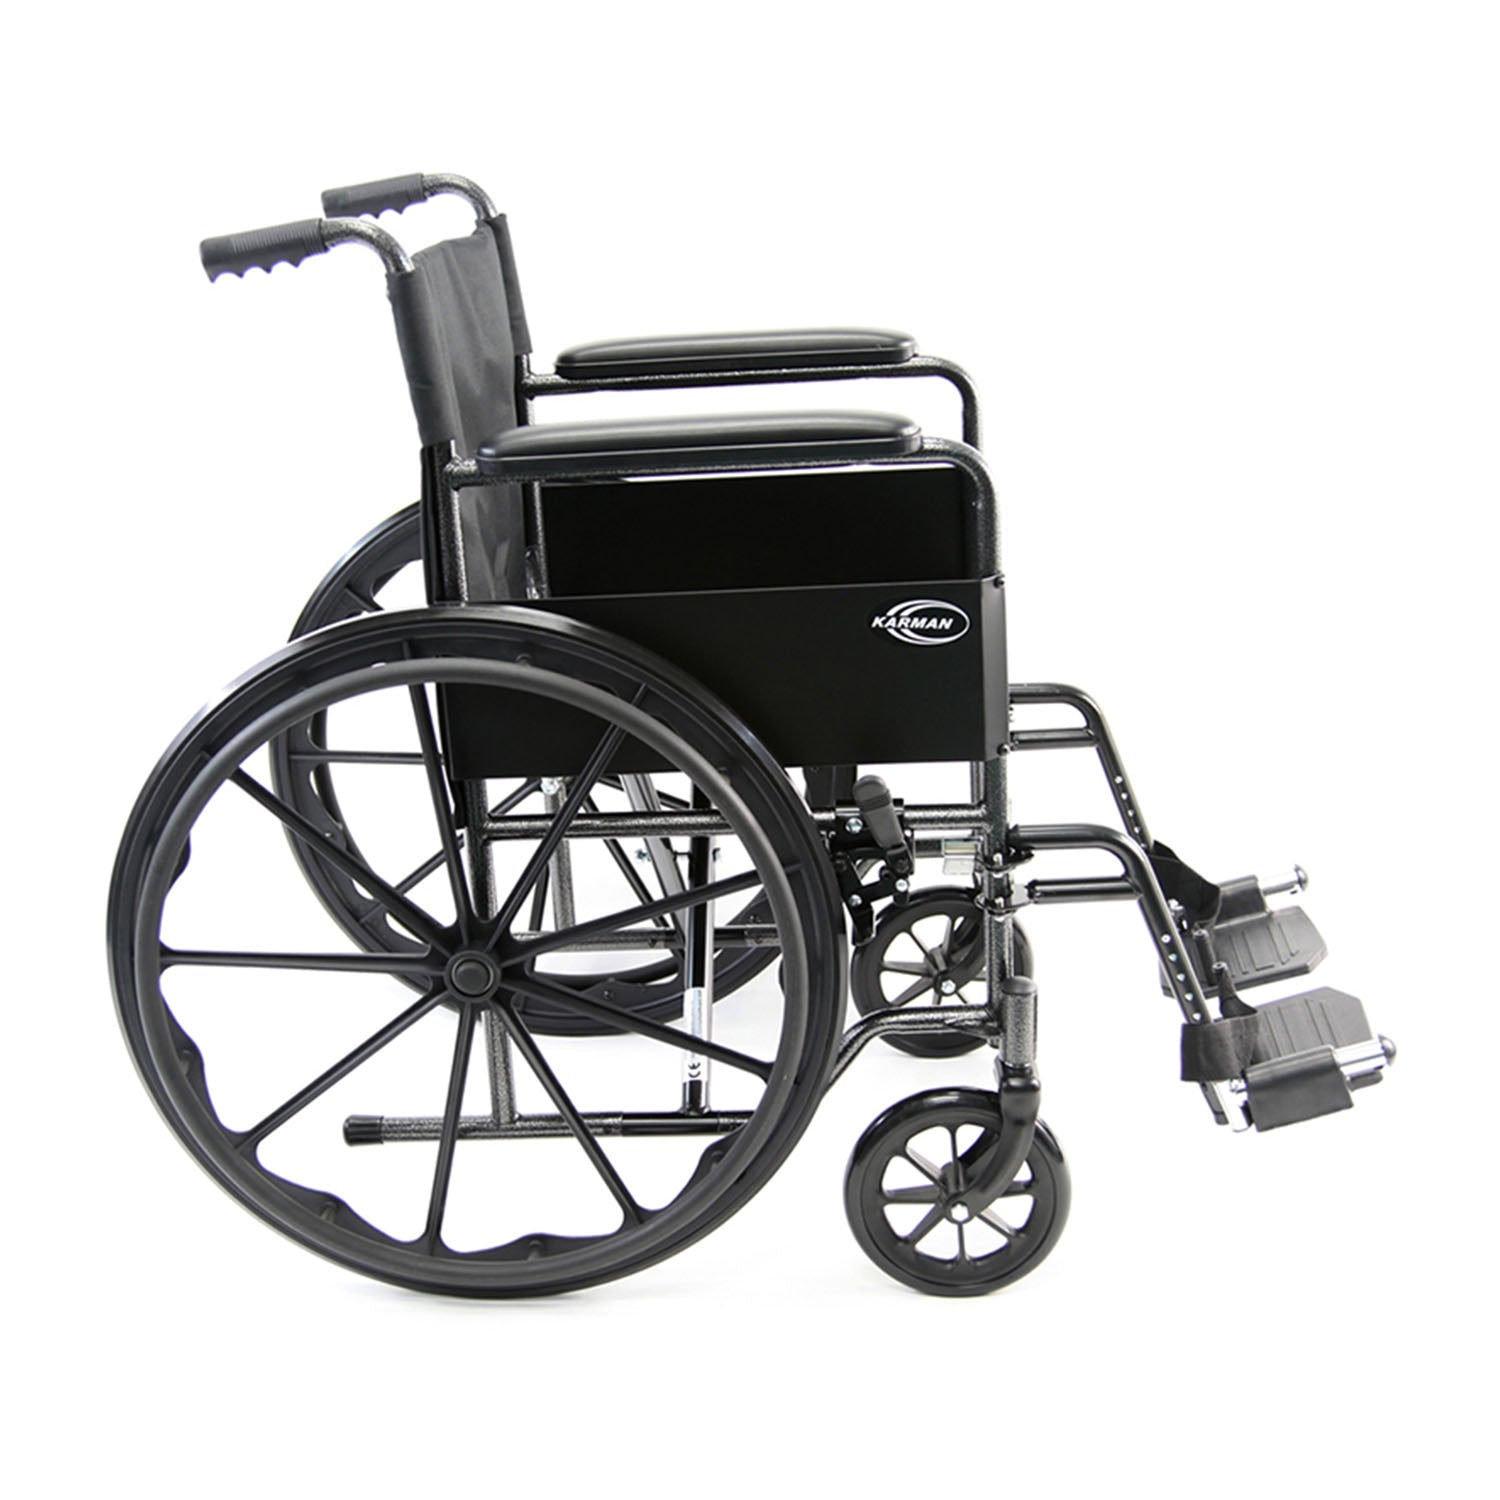 Karman LT-800T 18 inch Seat 34 lbs. Lightweight Steel Wheelchair with Fixed Armrest